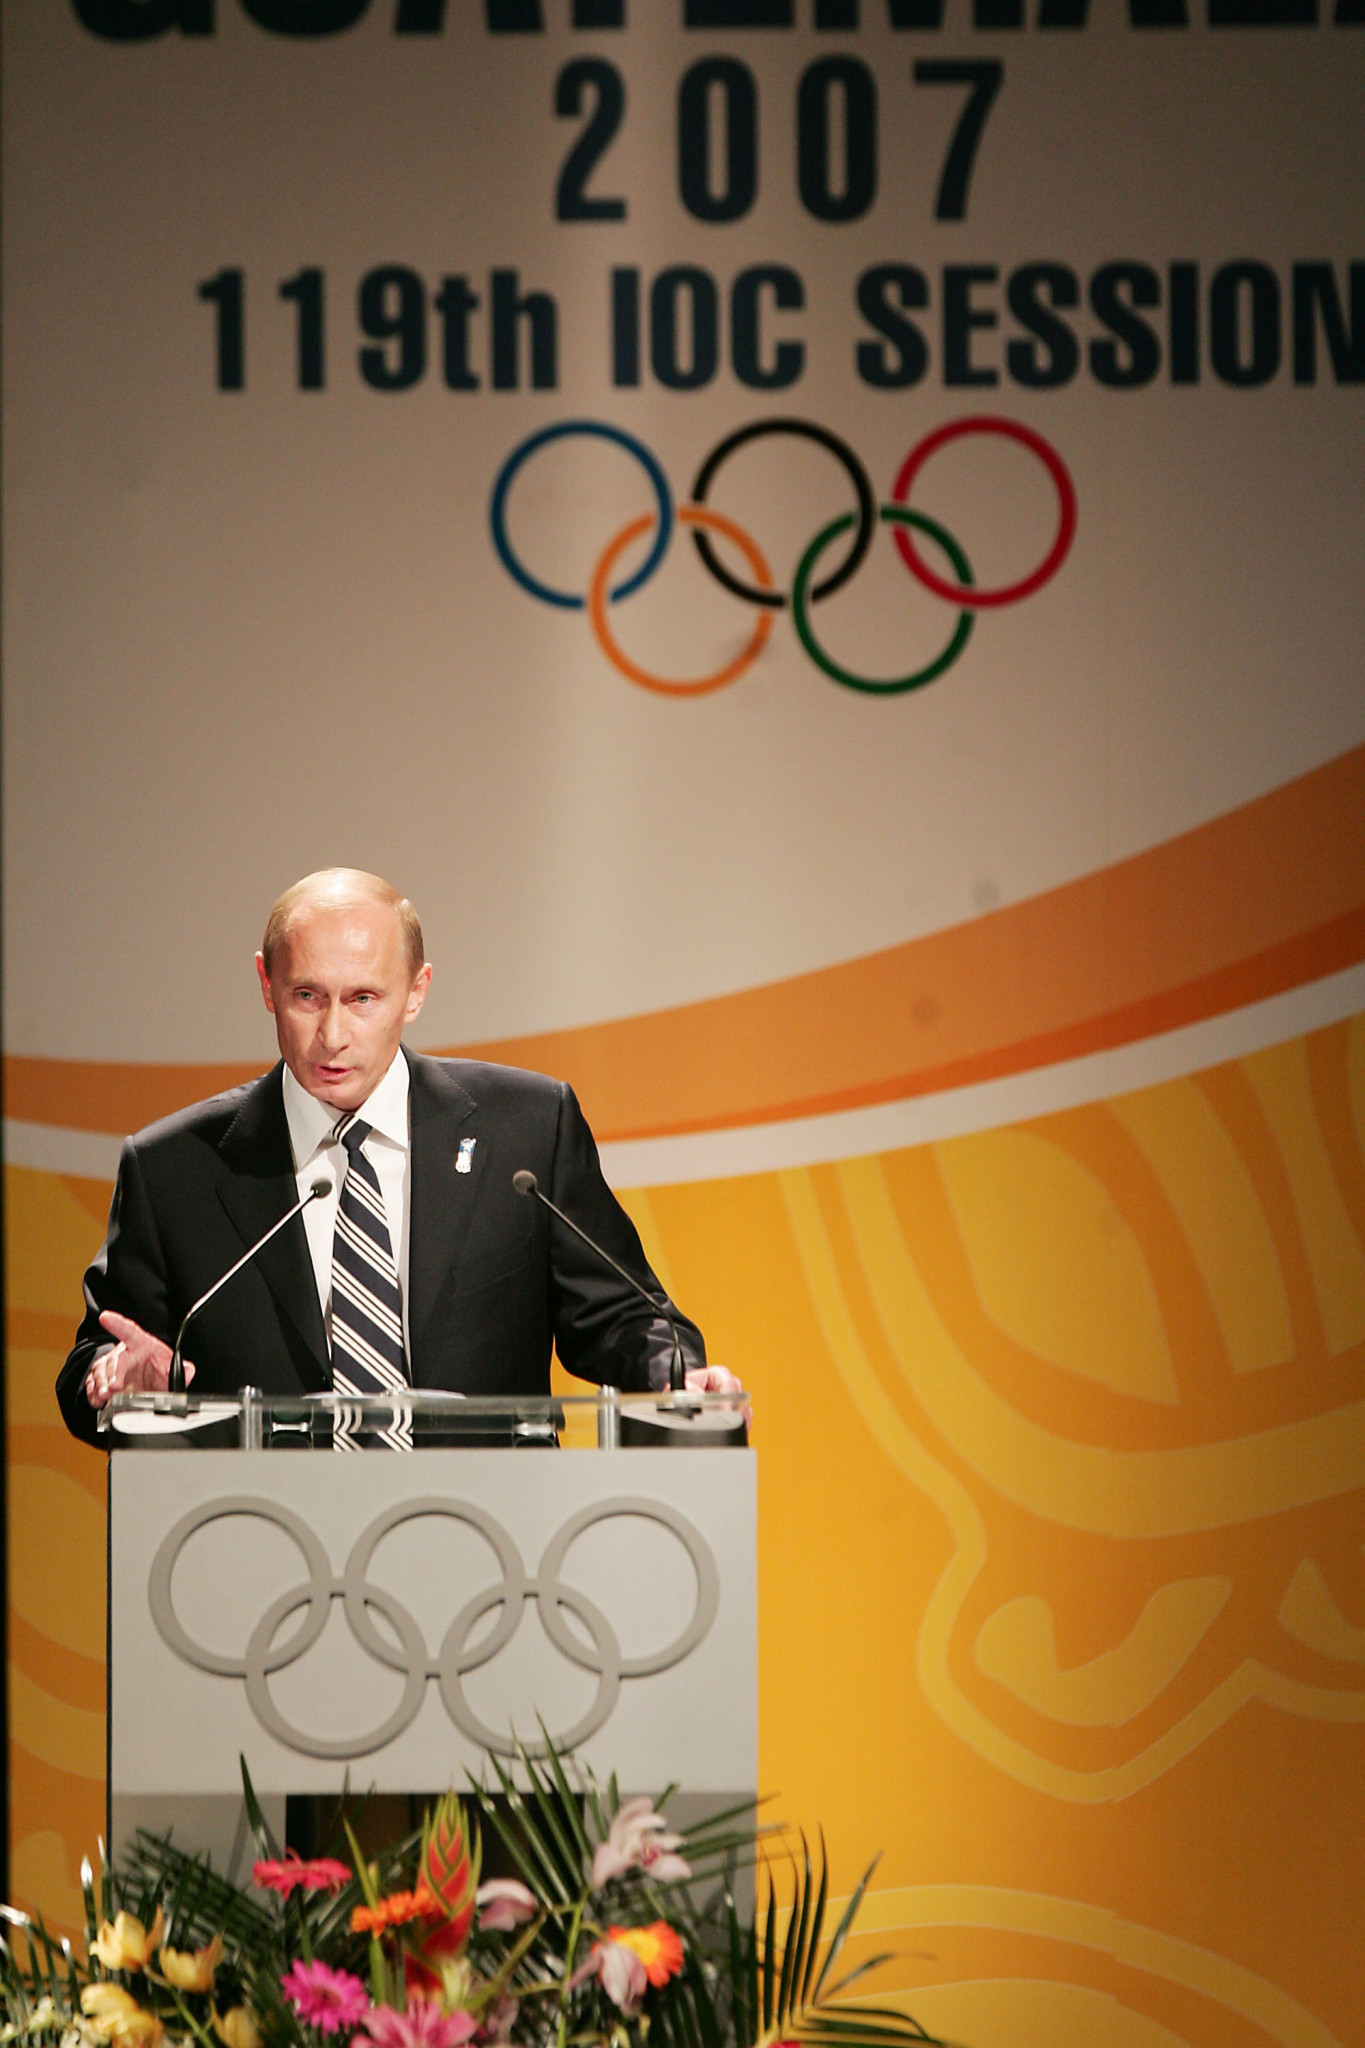 Vladimir Putin's speech to the IOC at its Session in Guatemala in 2007 proved decisive in Sochi being awarded the 2014 Olympic and Paralympic Games - marking the start of Russia's 